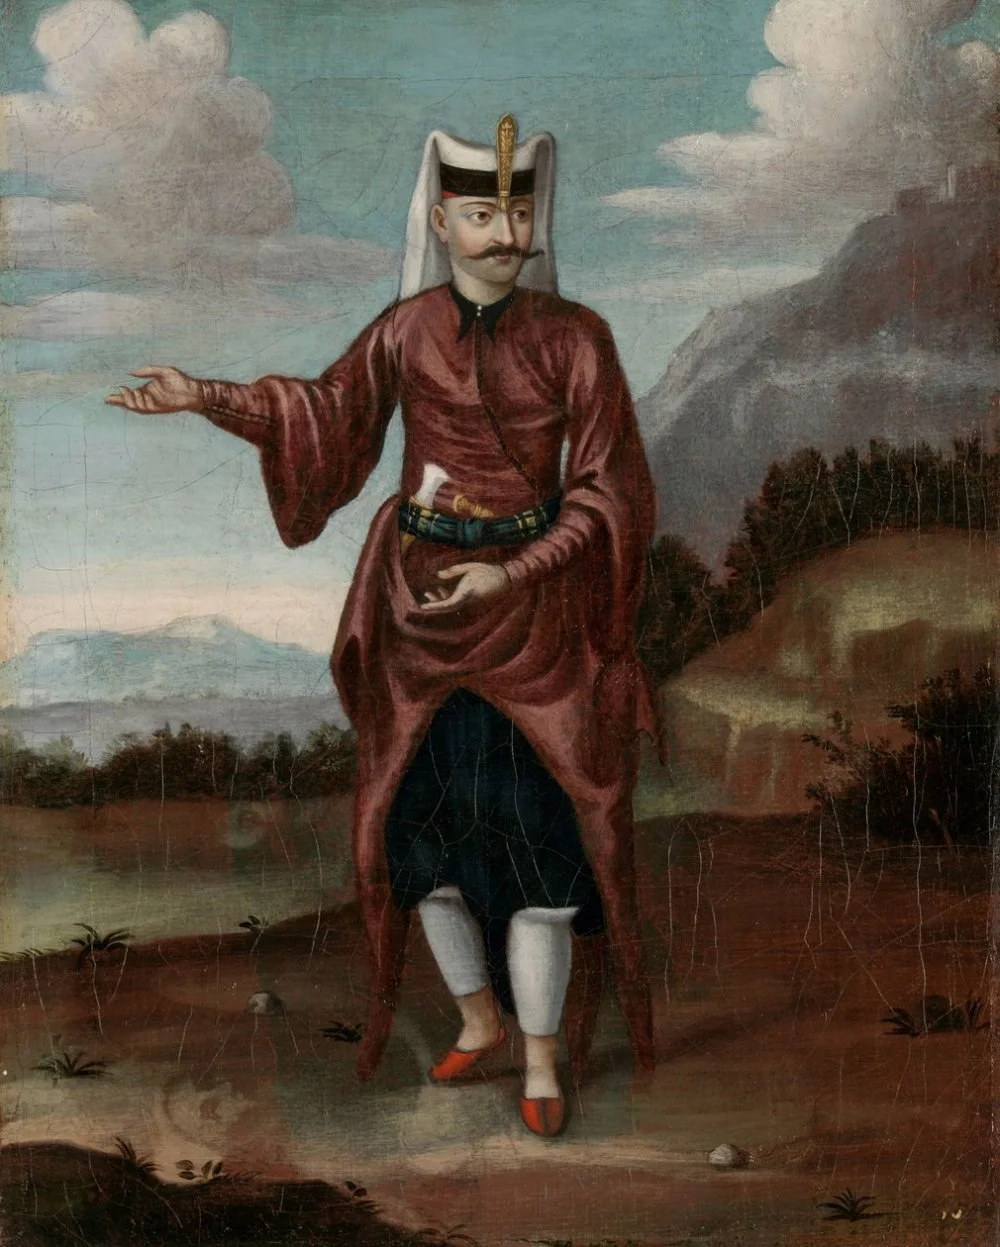 Jean Baptiste Vanmour “A Soldier of the Janissaries” between 1700 and 1737 /Rijks Museum, Amsterdam